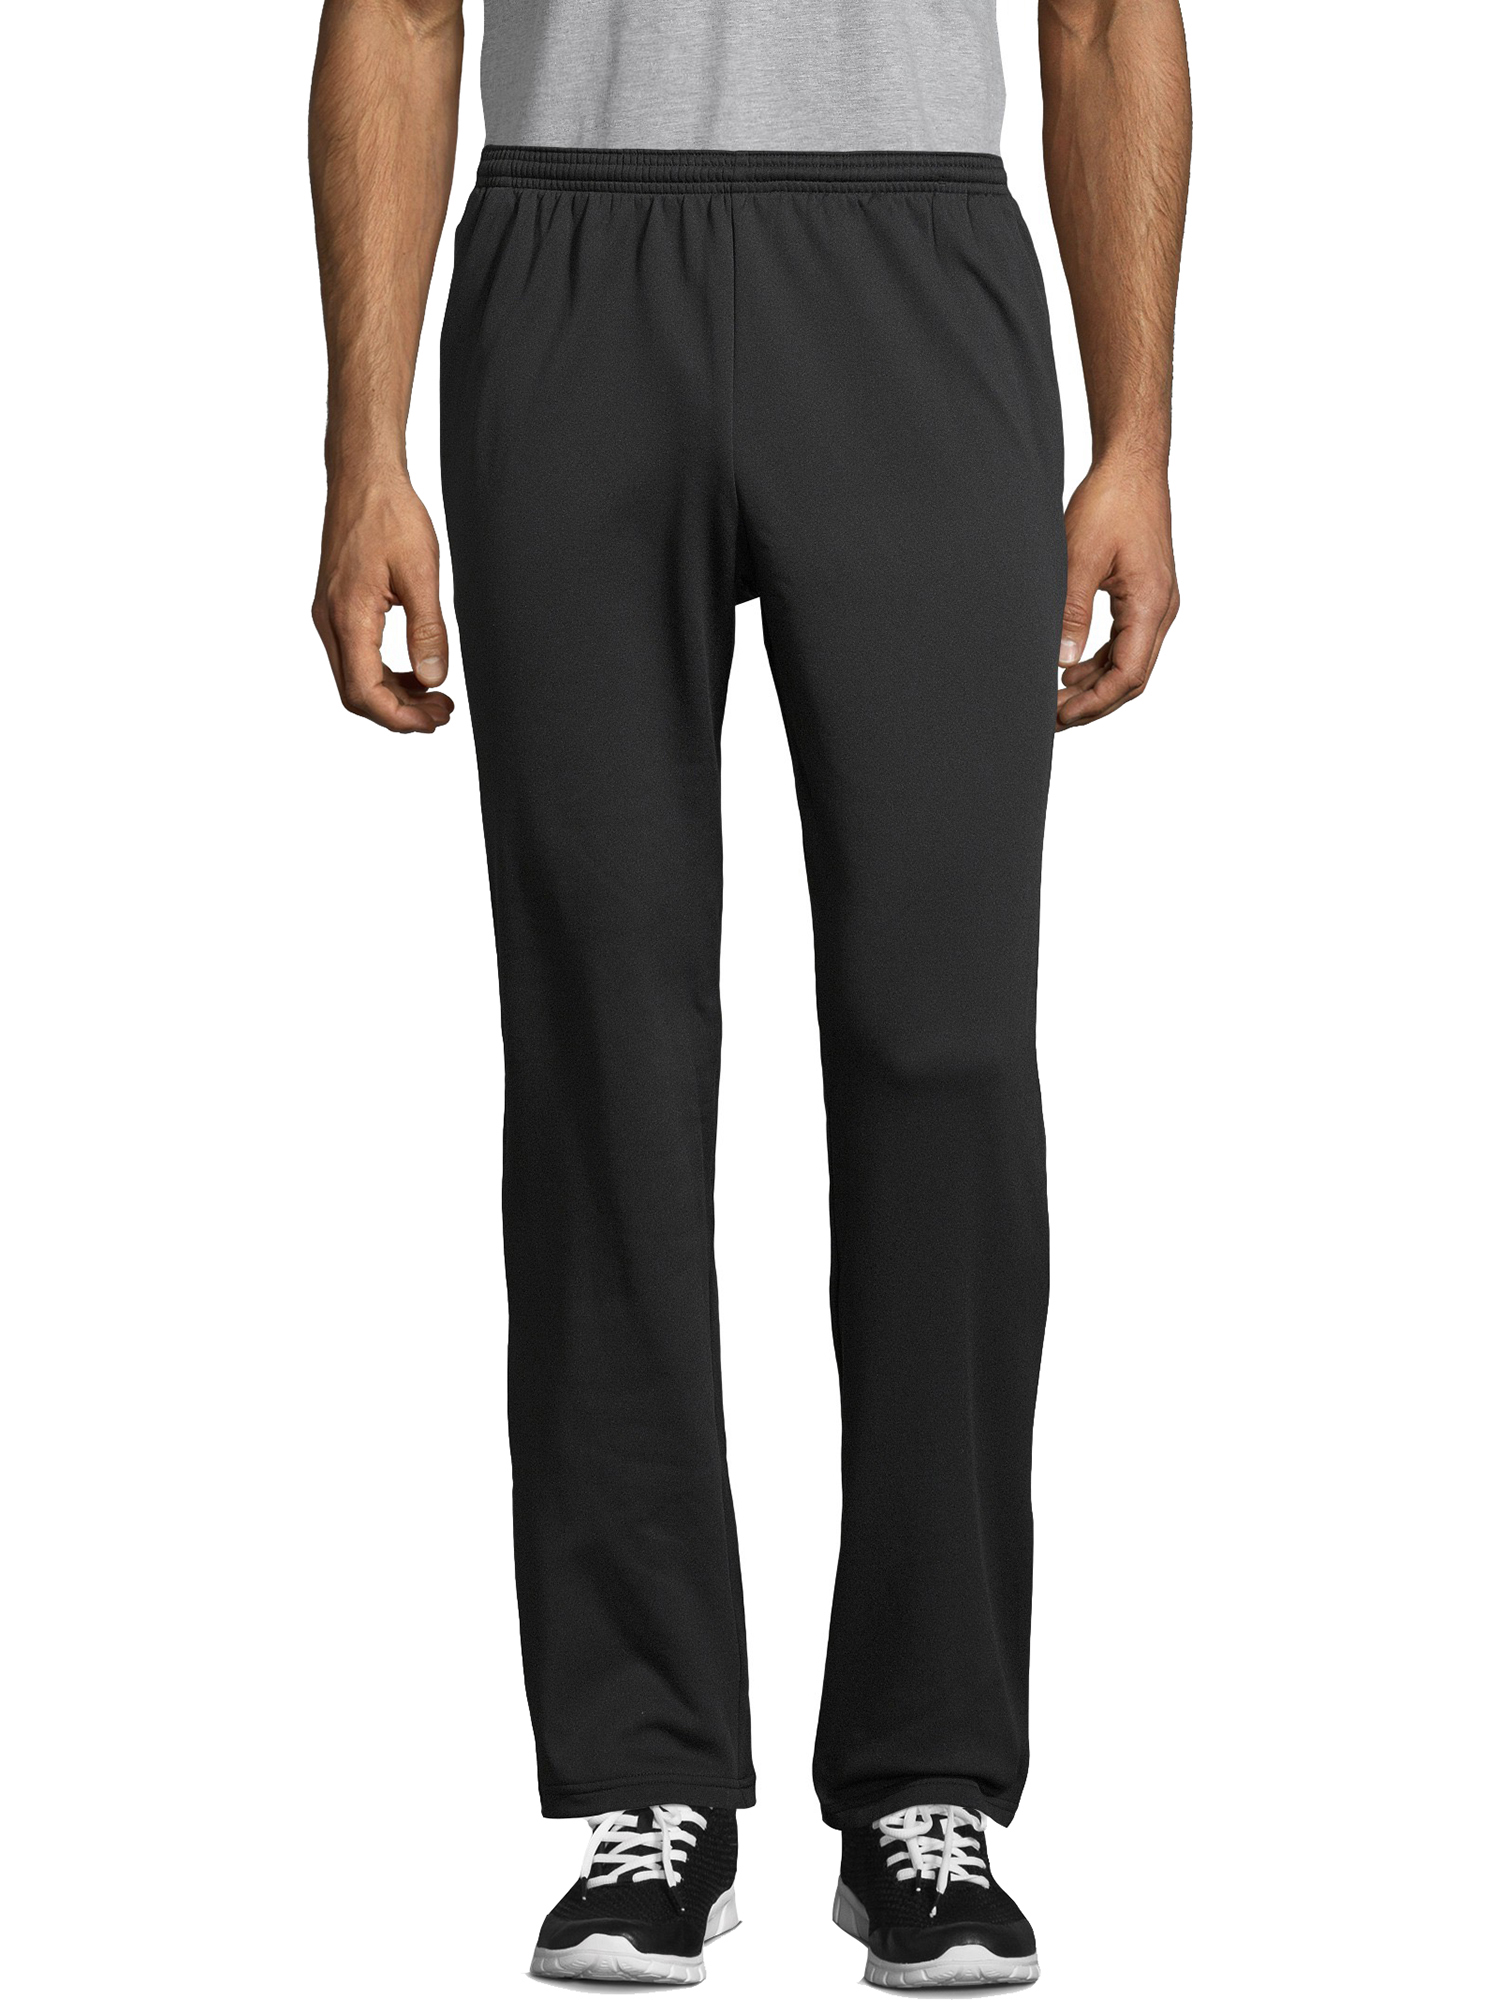 Hanes Sport Men's and Big Men's Performance Sweatpants with Pockets, Up to Size 2XL - image 1 of 5